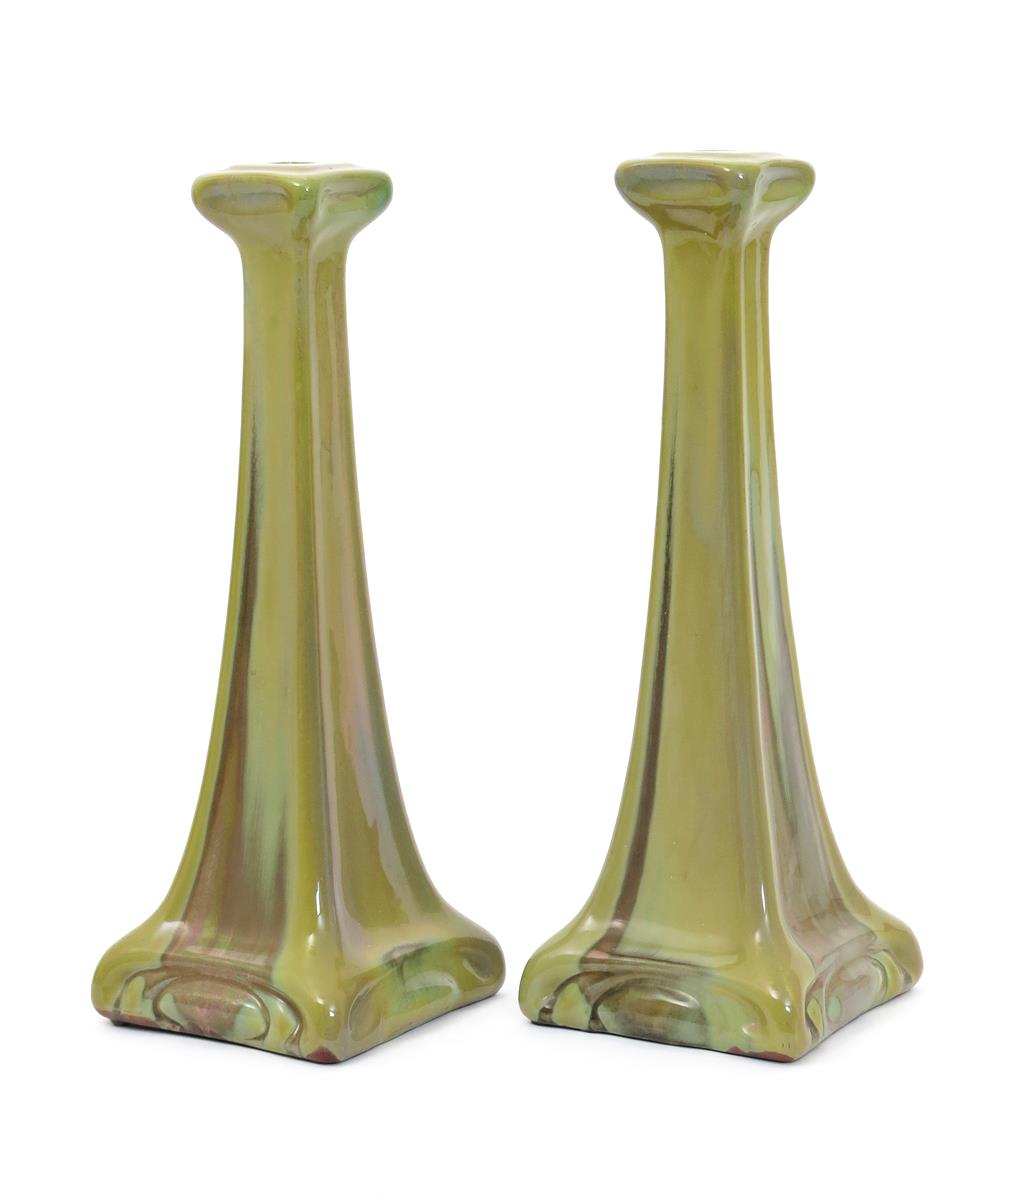 A pair of Carter's Poole lustre tall candlesticks designed by Owen Carter, dated 1906, tapering